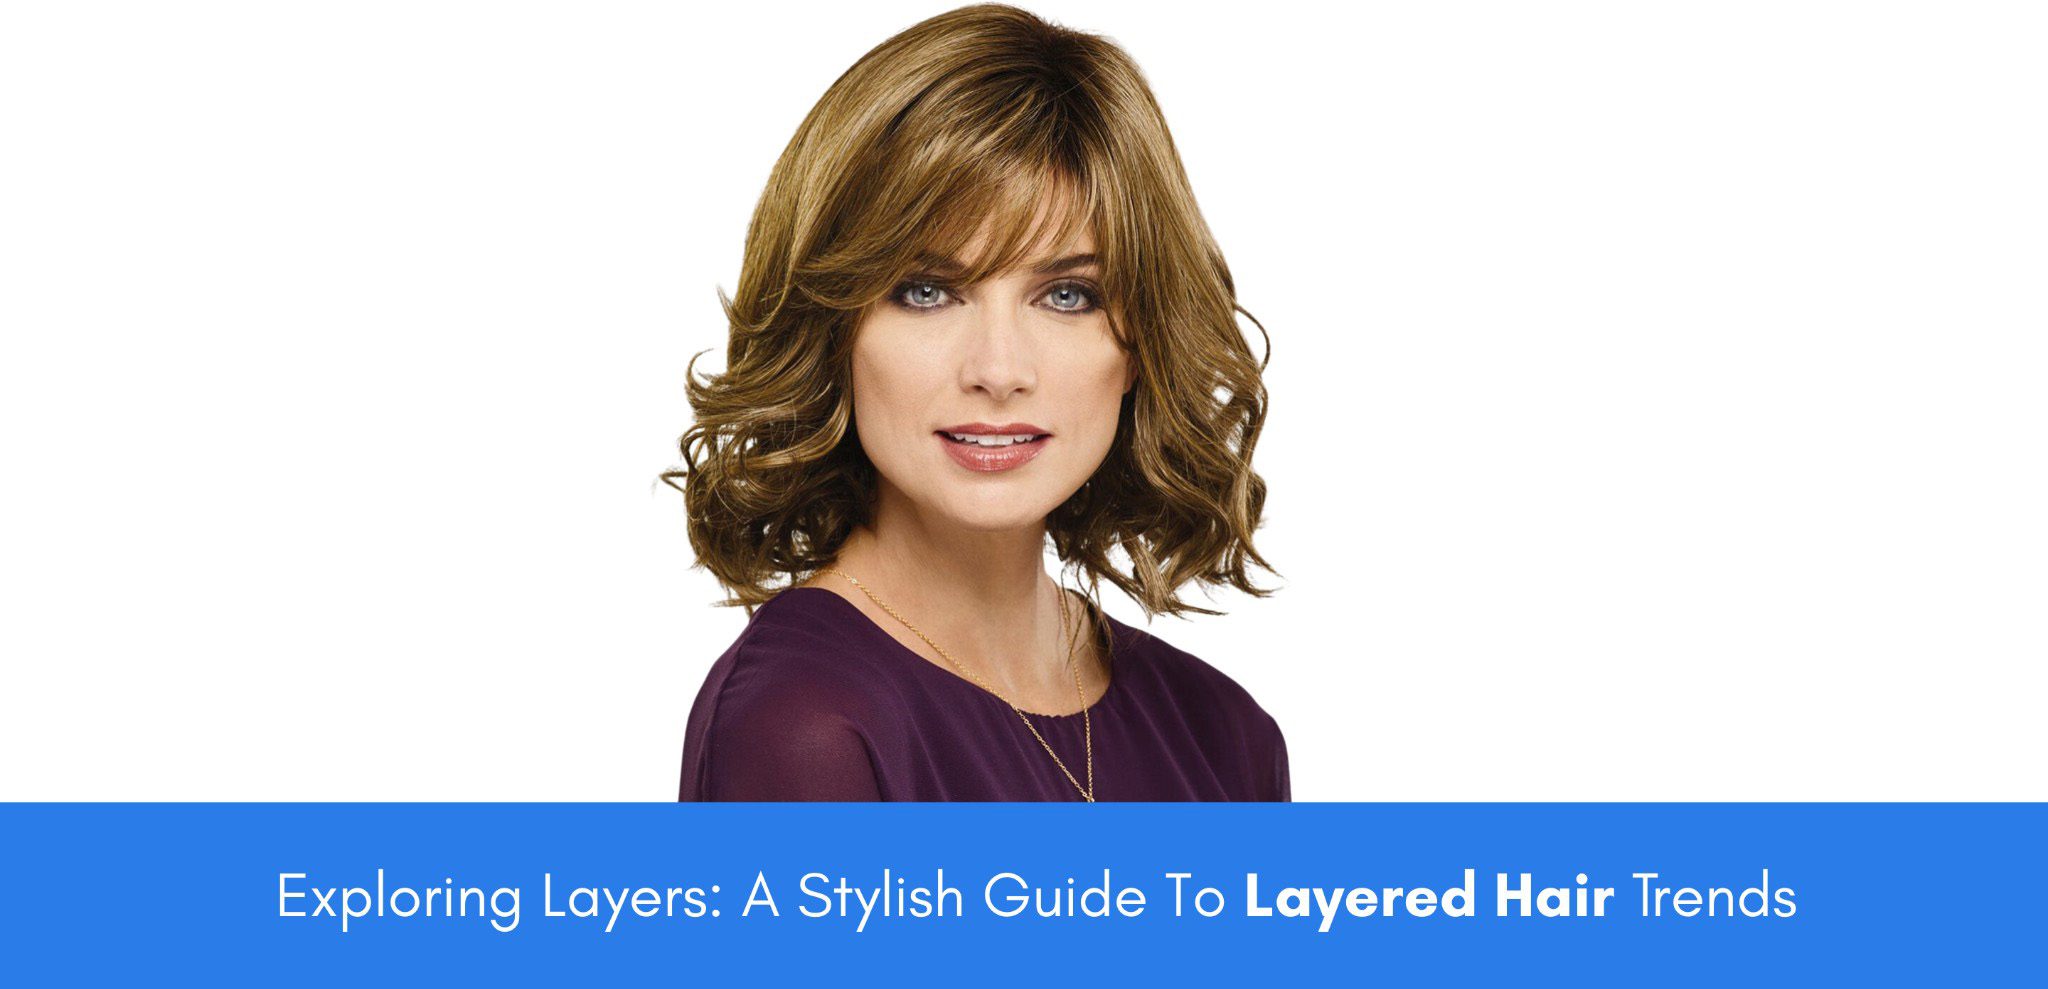 Exploring Layers: A Stylish Guide To Layered Hair Trends